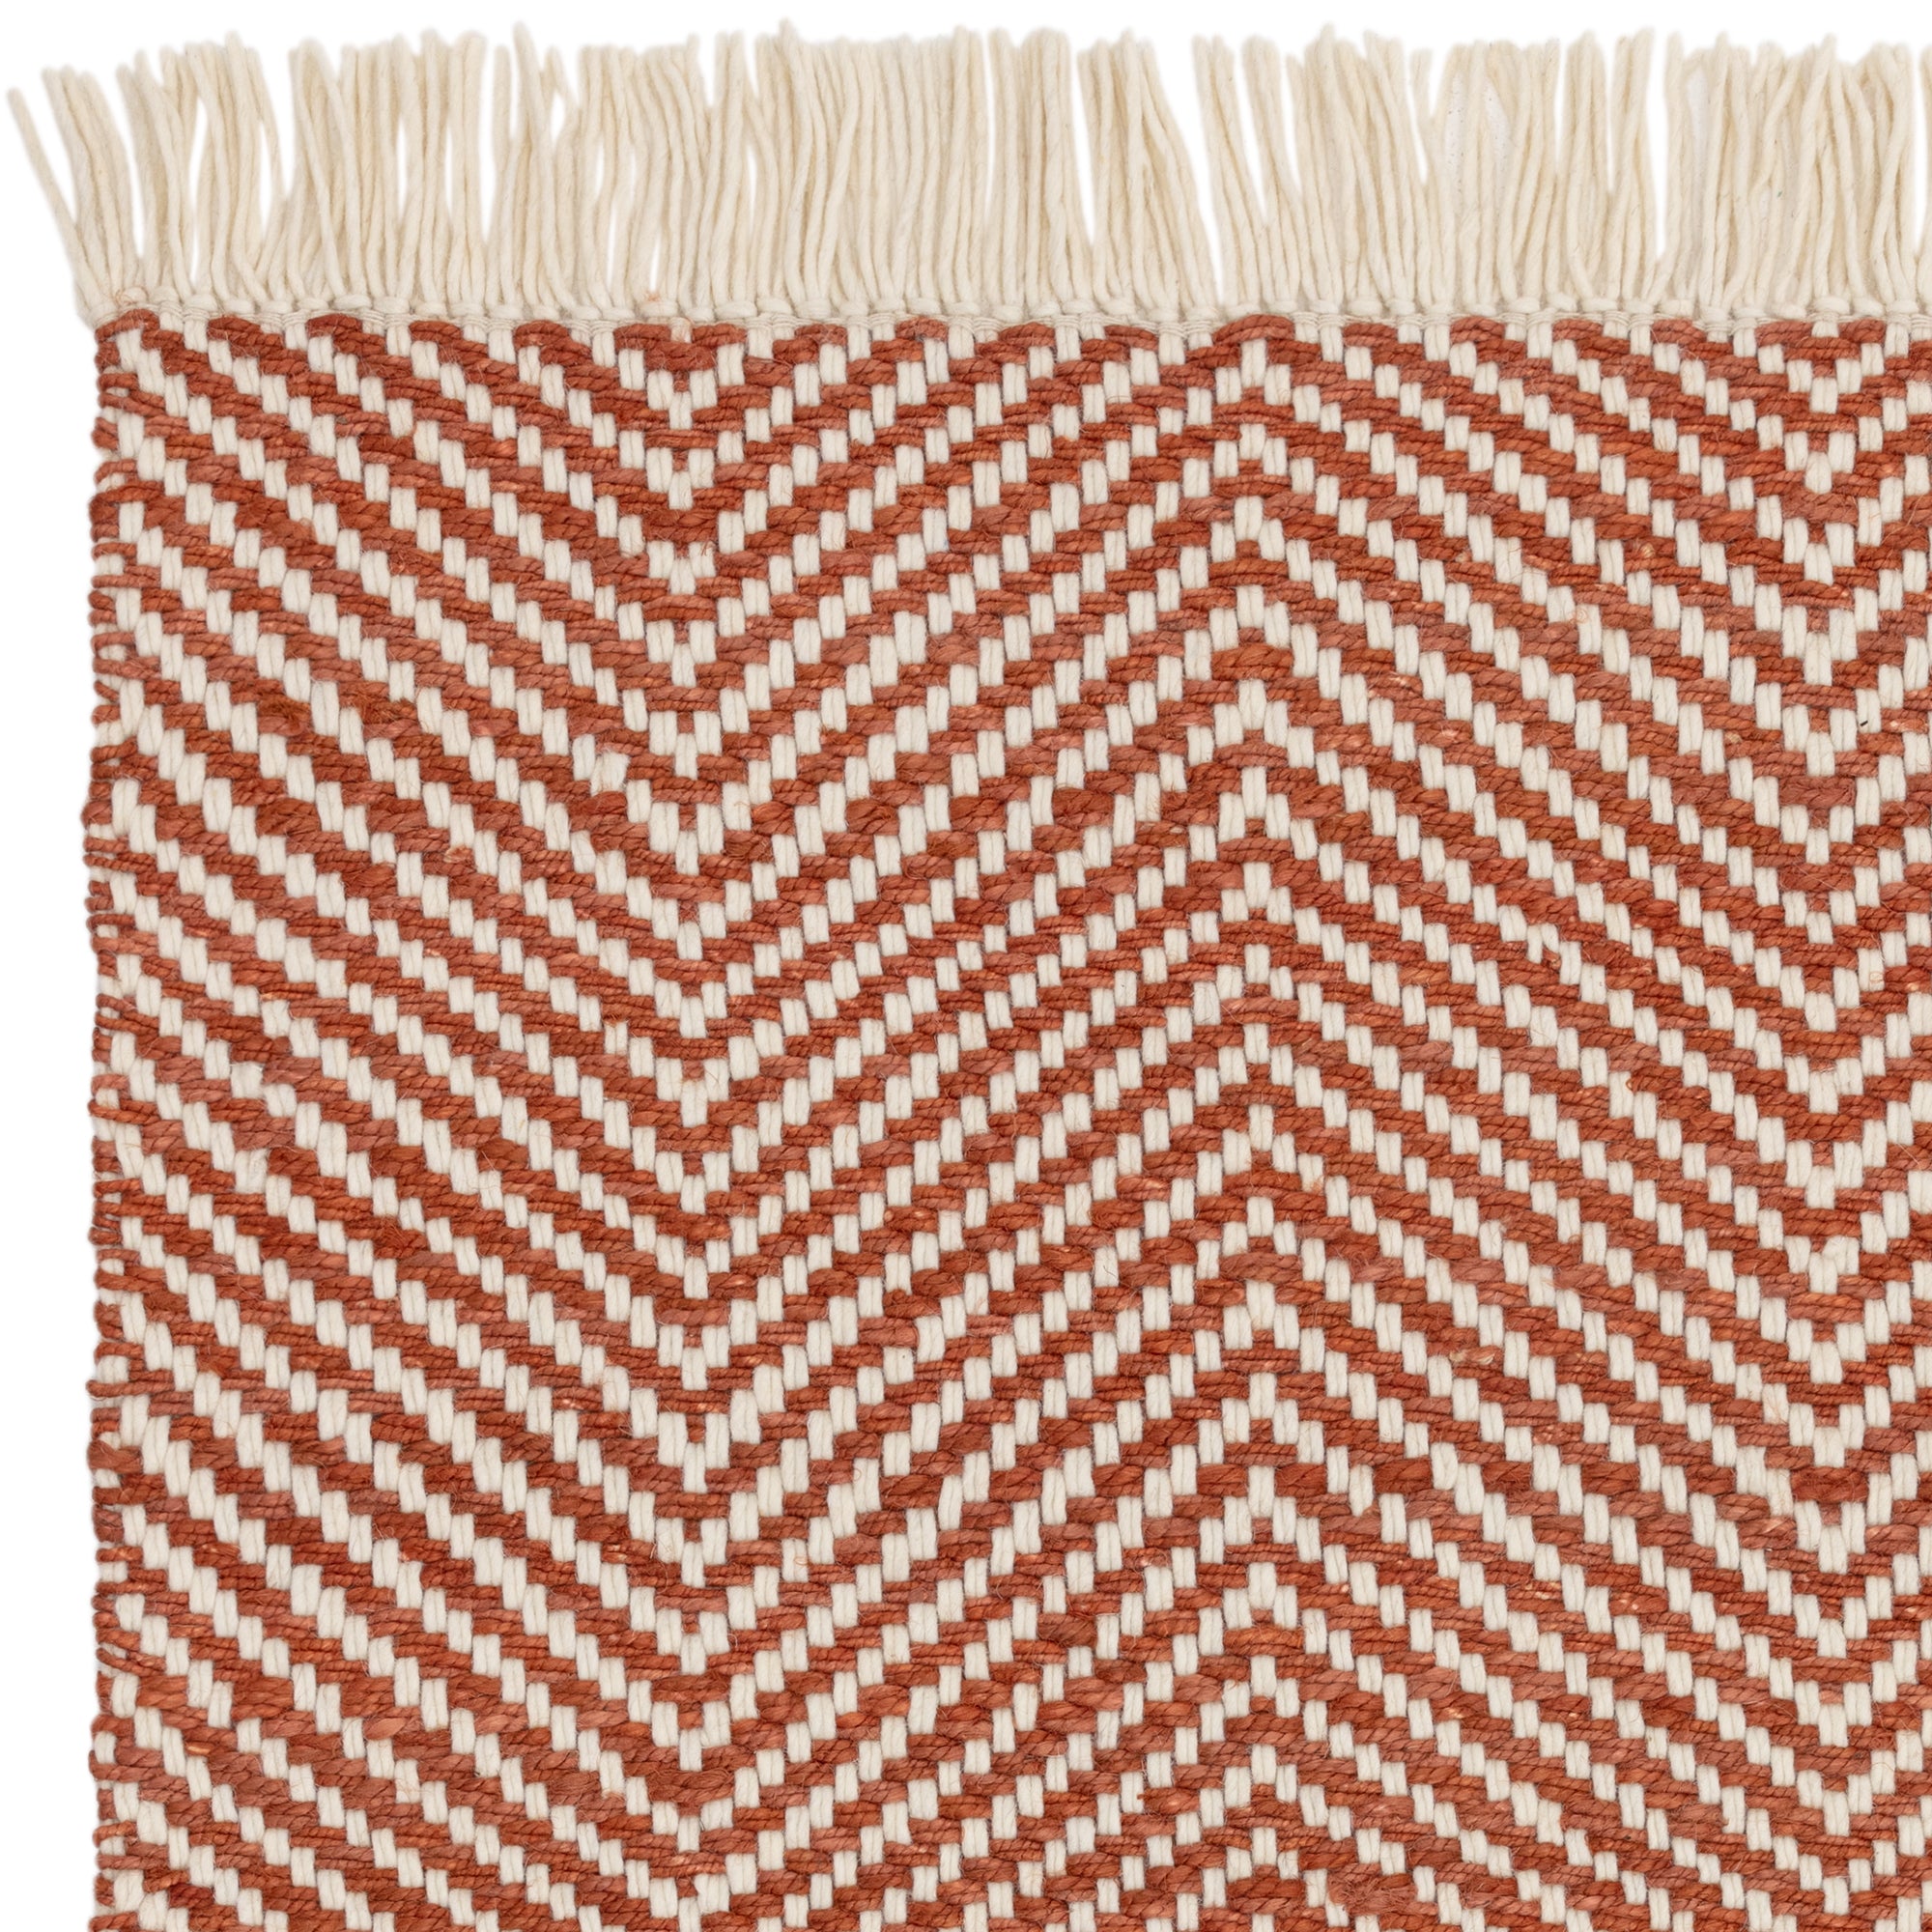 Textured woven rug with red and cream chevron pattern